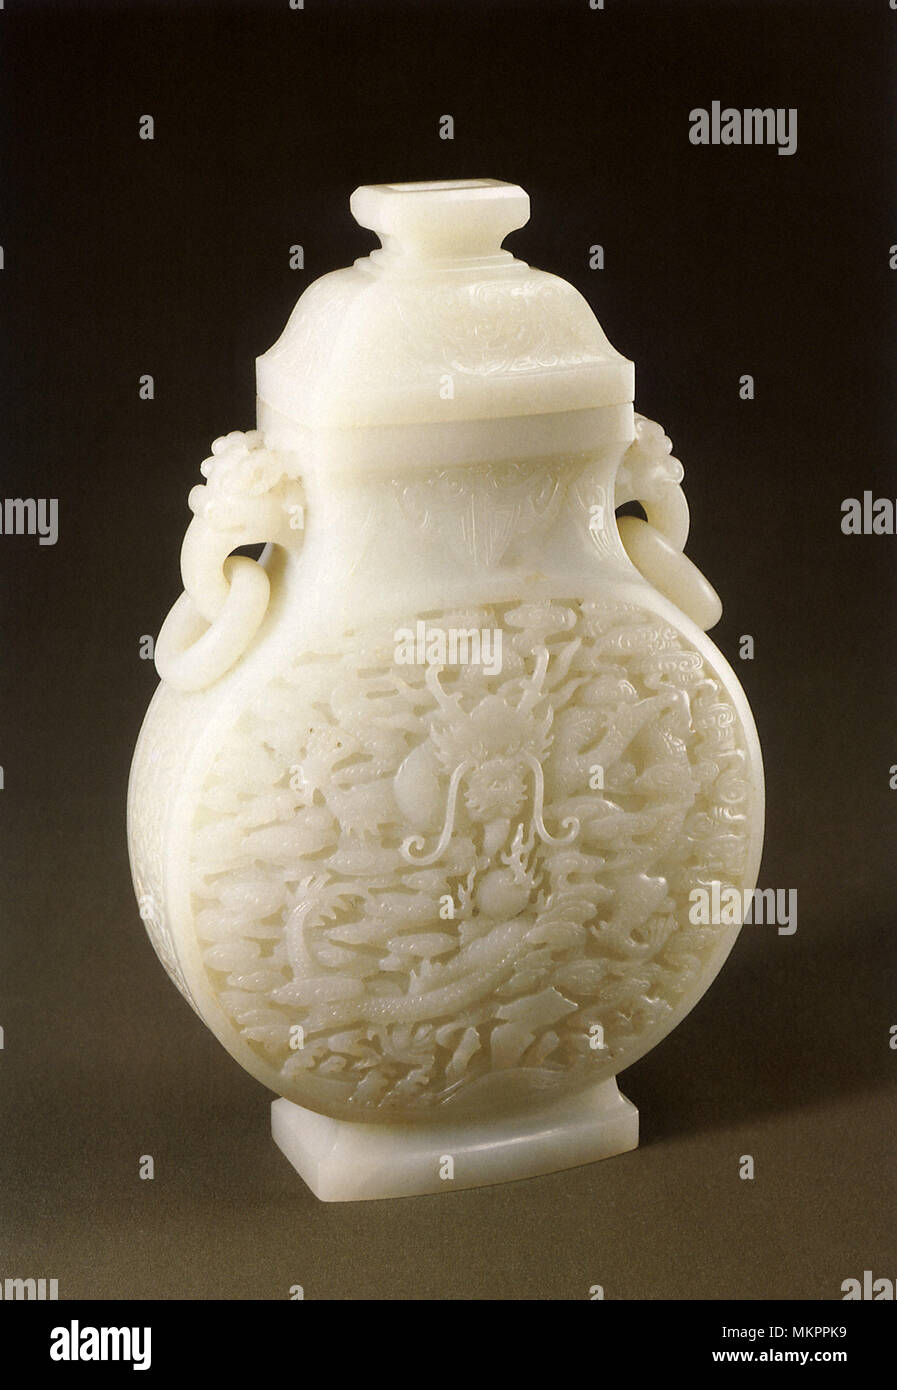 Vase decorated with Motifs of Clouds and Dragons Stock Photo